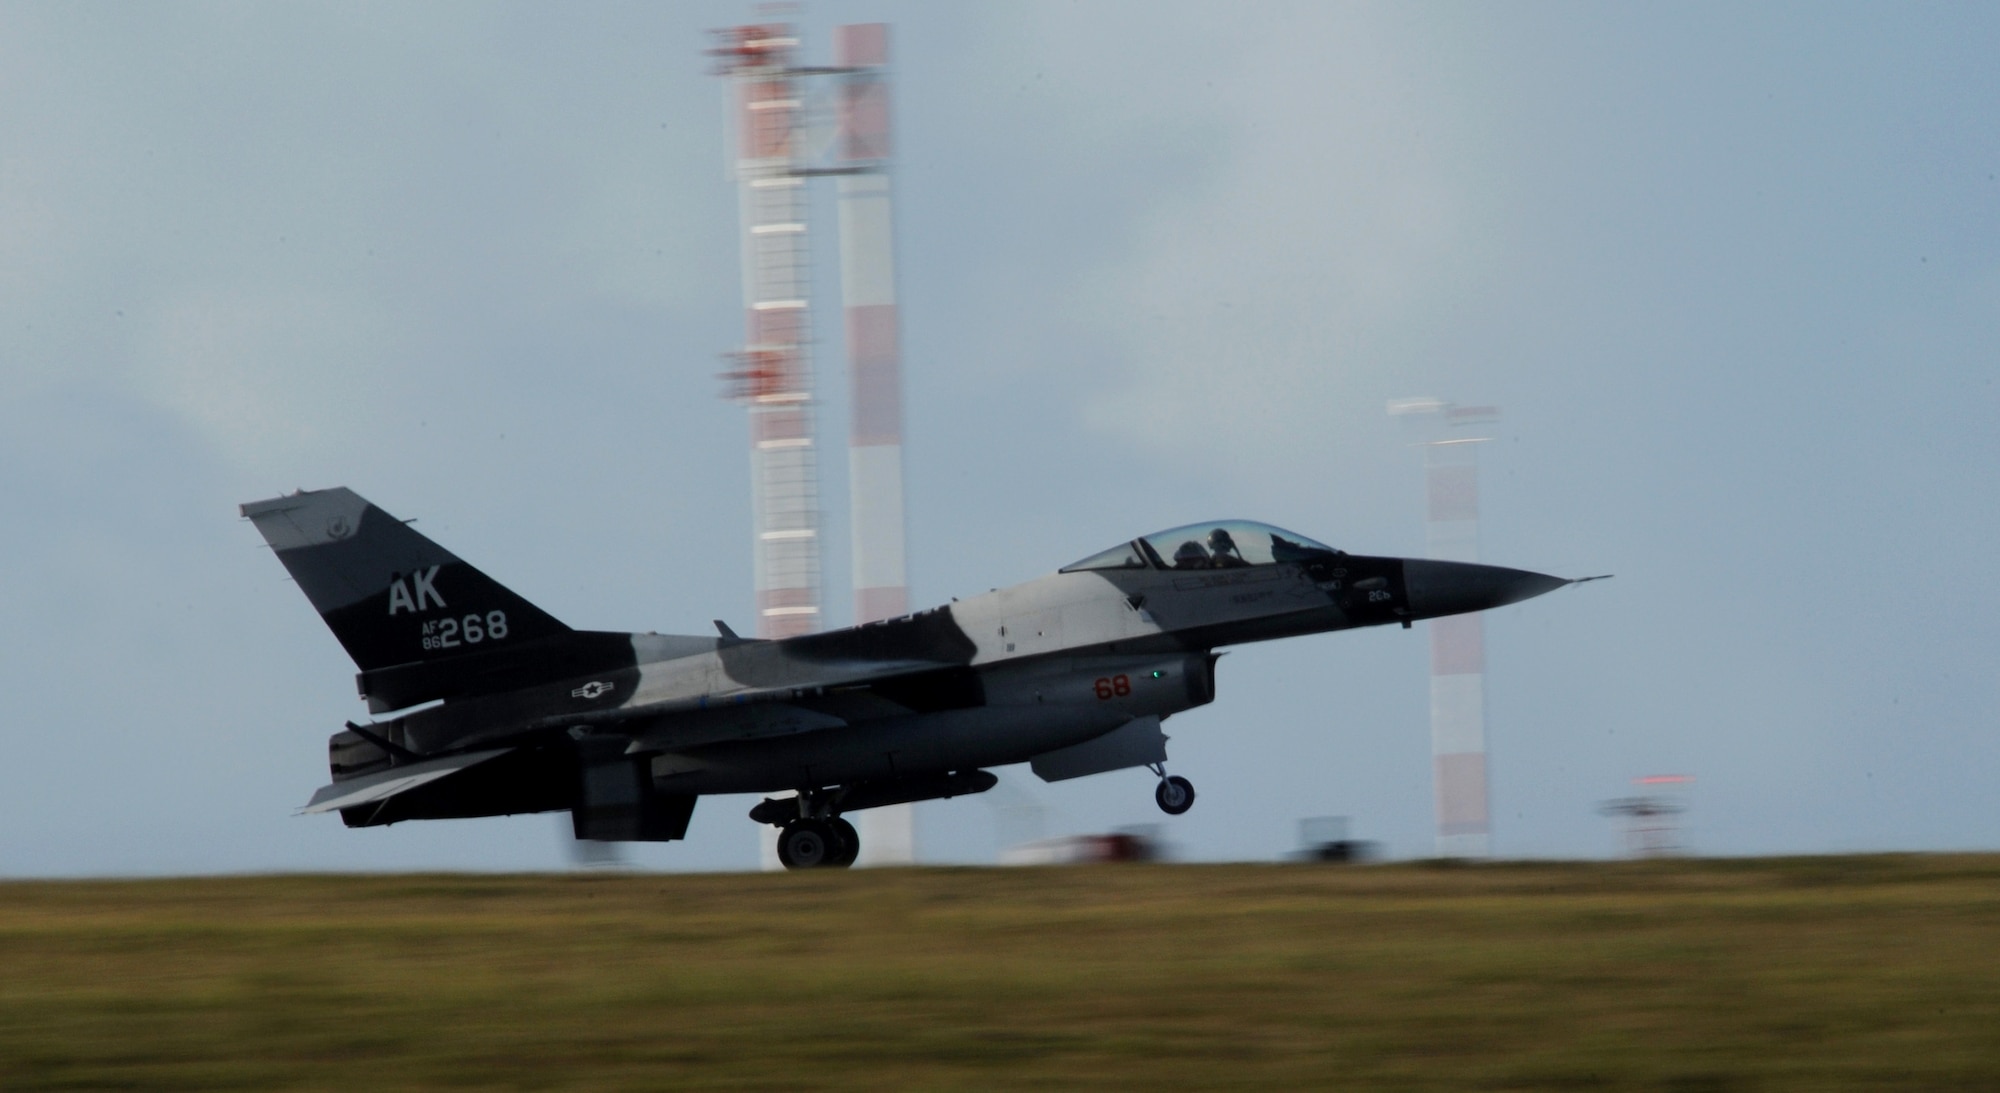 An F-16 Fighting Falcon 18th Aggressor Squadron, Eielson Air Force Base, Alaska, lands at Andersen AFB, Guam on Jan. 31 for exercise Cope North 09-1 from 2-13 Feb. Japan Air Self Defense Force F-2s from the 6th Squadron, Tsuiki Air Base and E-2Cs from the 601st Squadron, Misawa Air Base will join forward deployed USAF  F-16 Fighting Falcons from the 18th Aggressor Squadron, Eielson AFB Alaska, B-52 Stratofortress' currently deployed to Andersen AFB, Guam from the 23rd Expeditionary Bomb Squadron, and Navy EA-6B from VAQ-136 Carrier Air Wing Five, Atsugi, Japan will participate in this year's exercise with a focus on interoperability.(U.S. Air Force photo/ Master Sgt. Kevin J. Gruenwald) released      